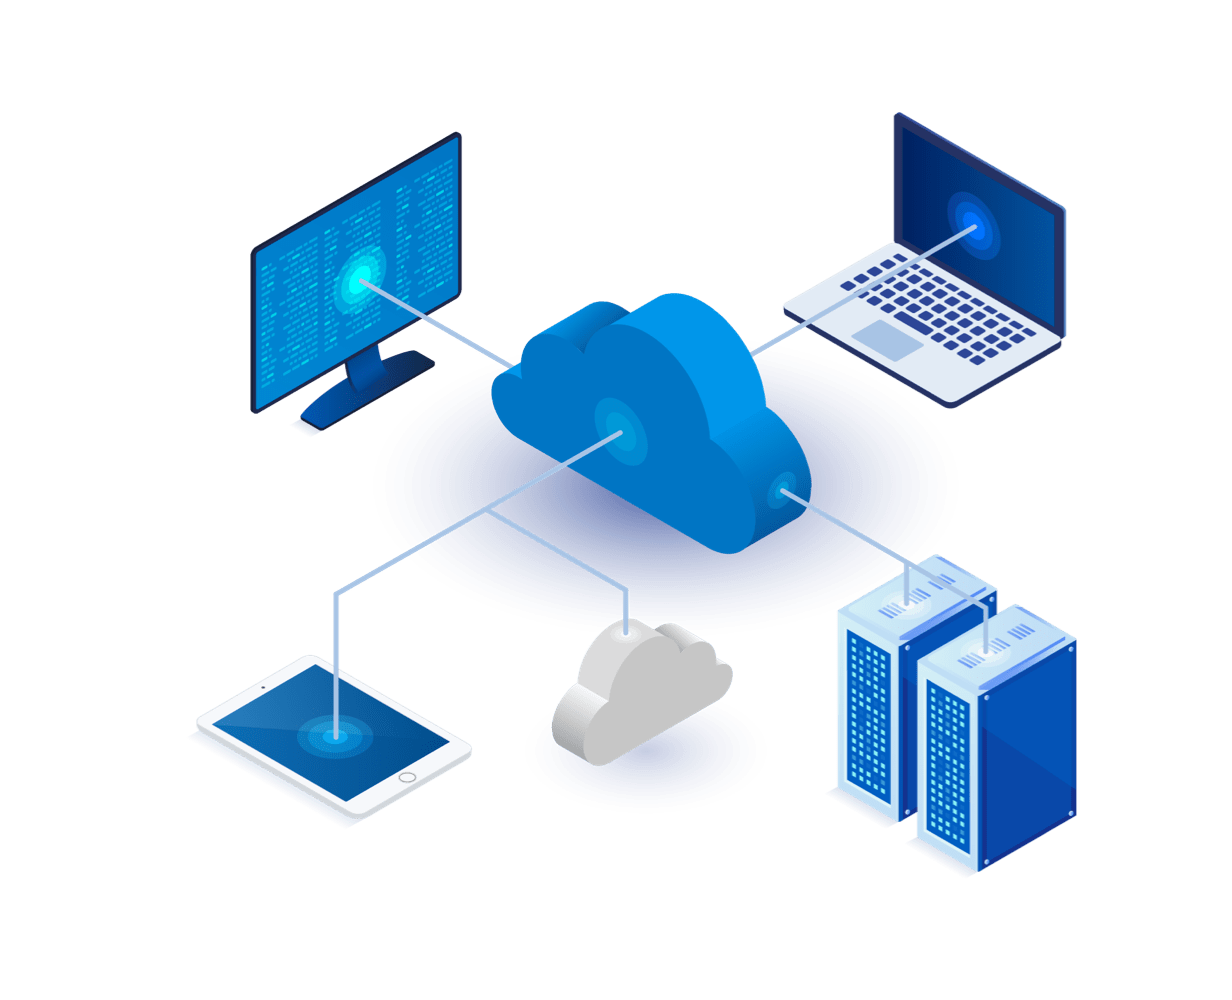 A cloud is connected to various devices and a server.